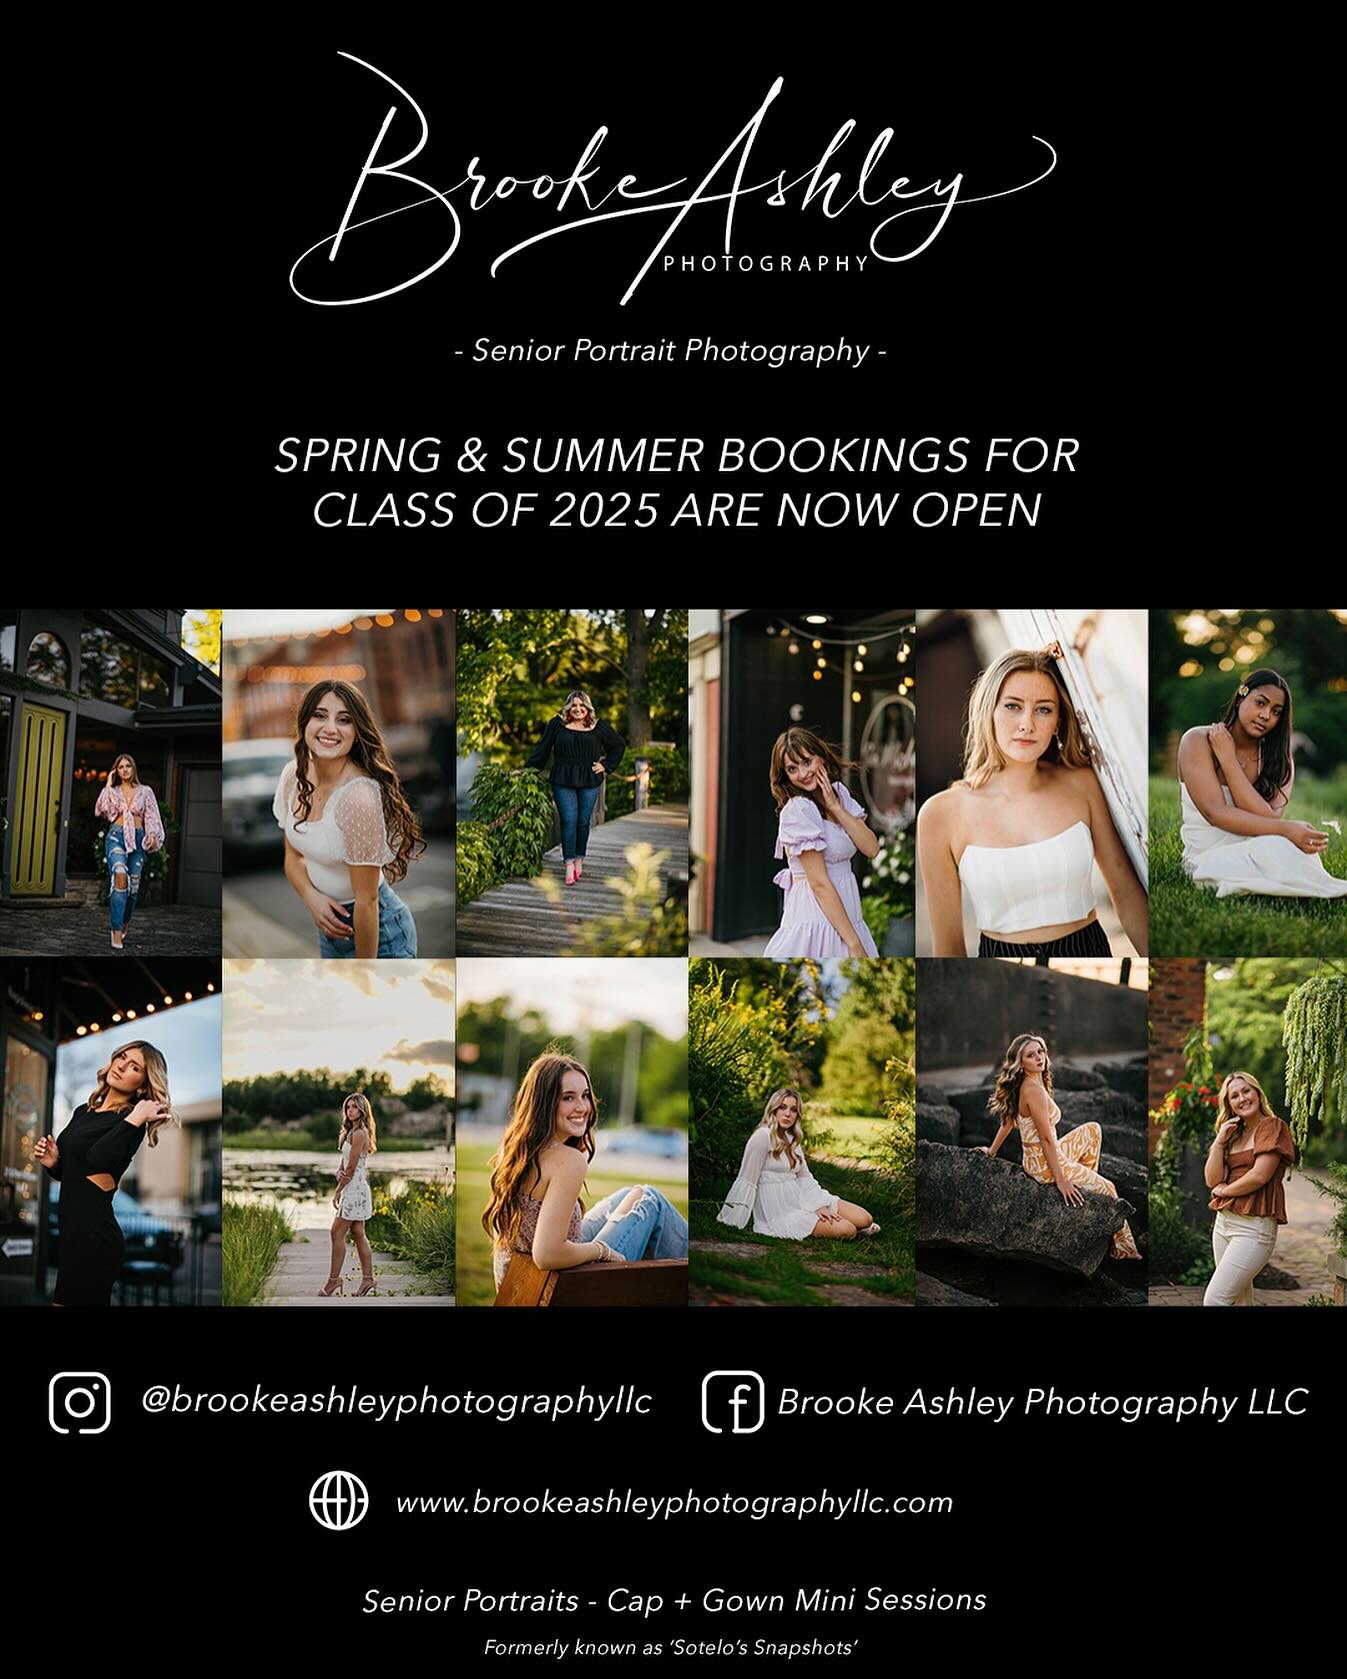 My spring + summer bookings are officially open! 🤍 I am so excited to see what being back to full time brings to my business&hellip; also, new packages are available and my website is finalized! So excited to see who books this year and what we will